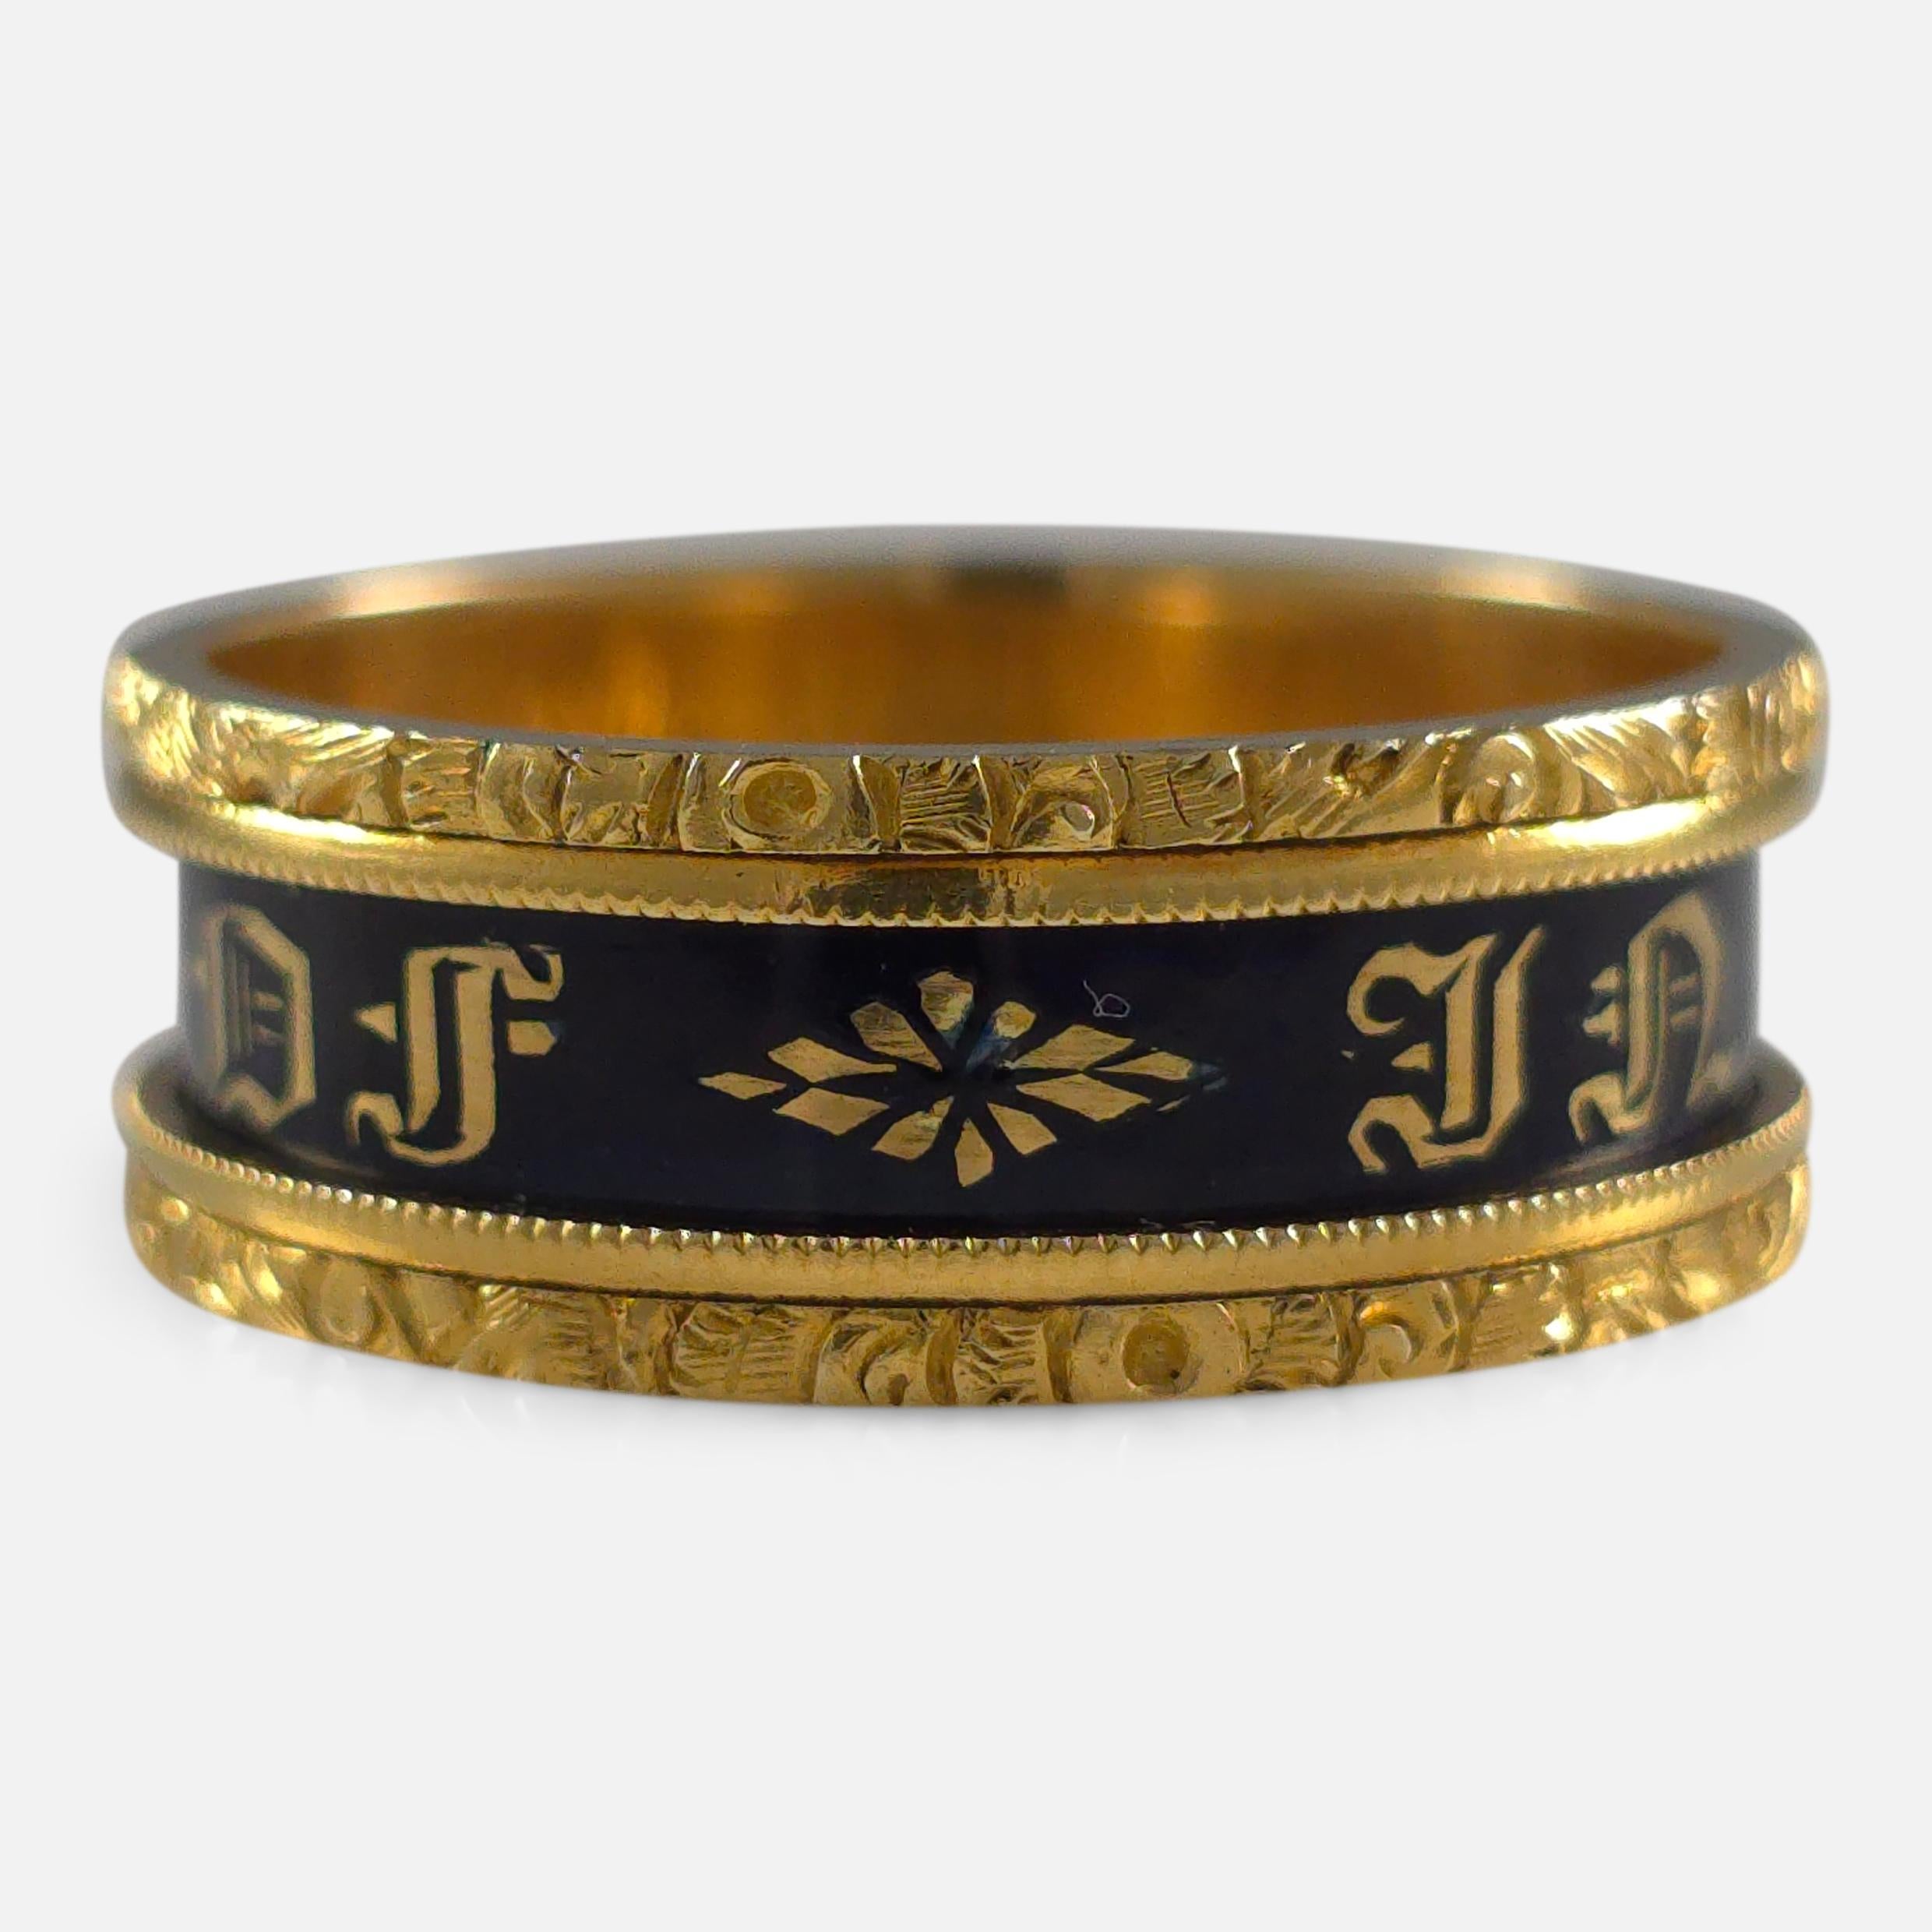 William IV 18ct yellow gold and black enamel memorial mourning ring, inscribed with 'IN MEMORY OF' within a gold foliate border and 'Wilson Agnew, died Feby 7th 1865, aged 83 ys' inside. Hallmarked London, 1833, '18' for 18 carat gold.

• Period: